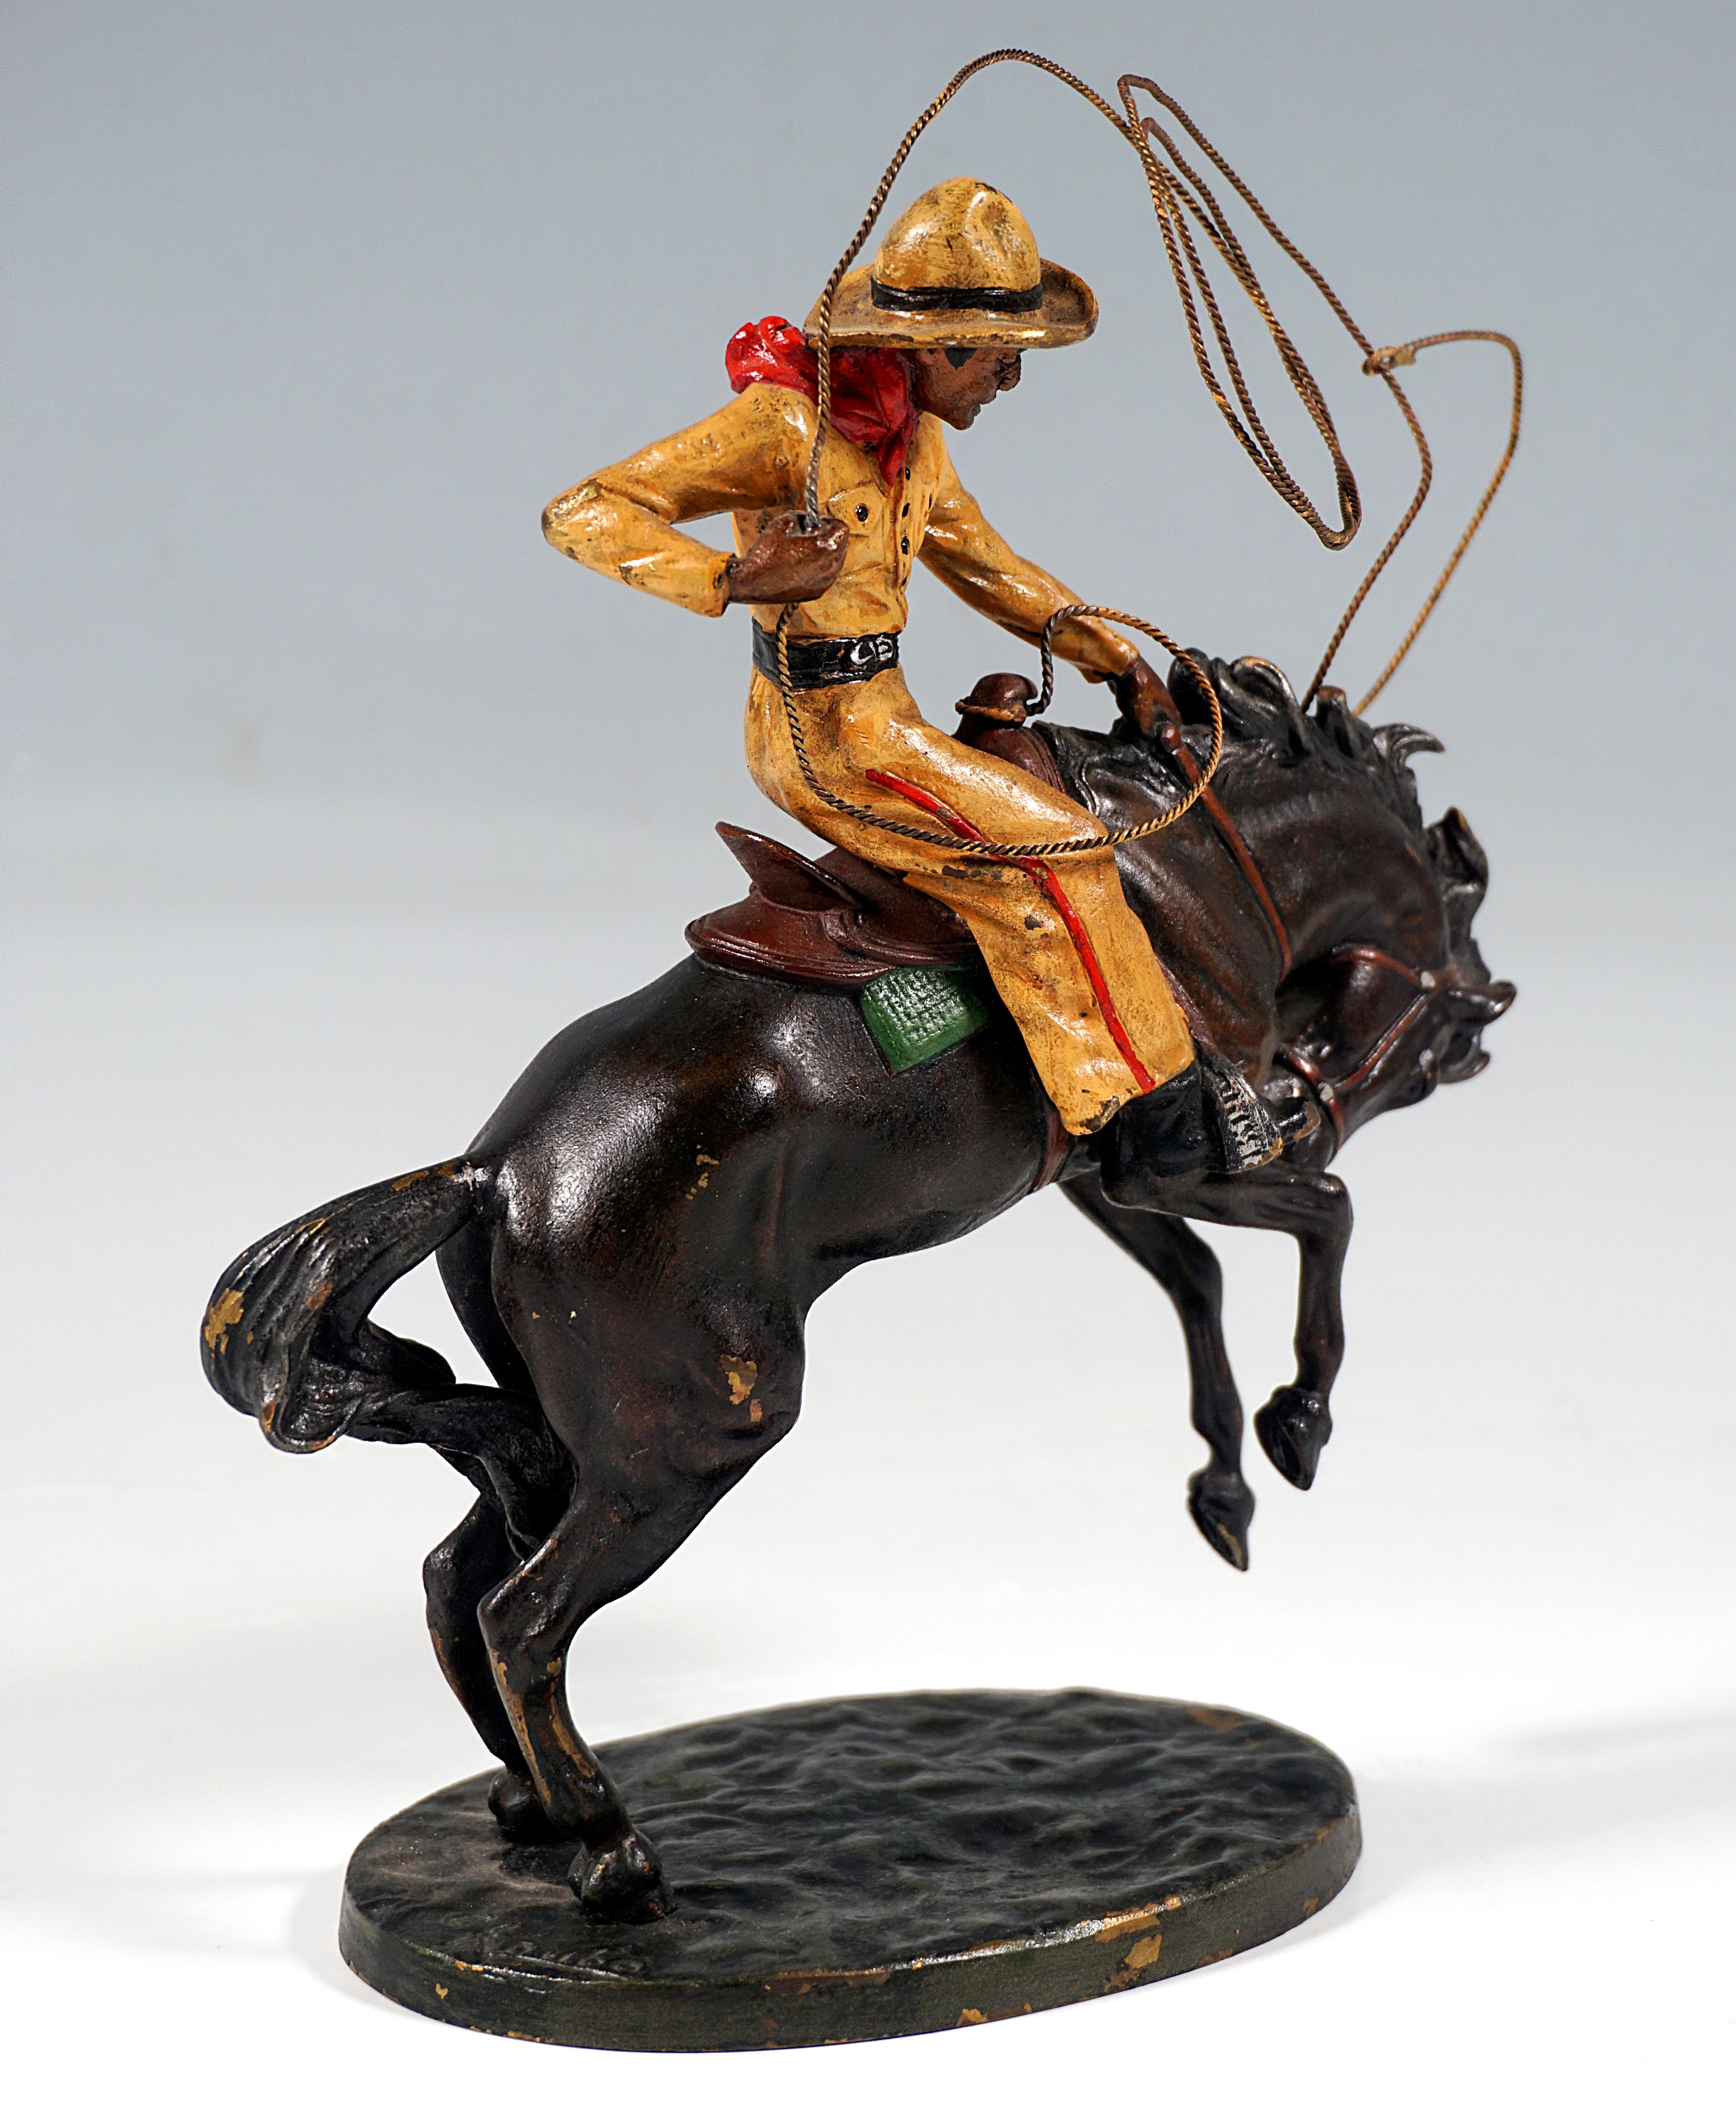 Excellent piece of Viennese Bronze Art around 1920
Cowboy in typical work clothes - shirt, baggy pants, bandana and cowboy hat - on bucking horse, holding in one hand the lasso attached to saddle and twirling high above the horse's head, the reins